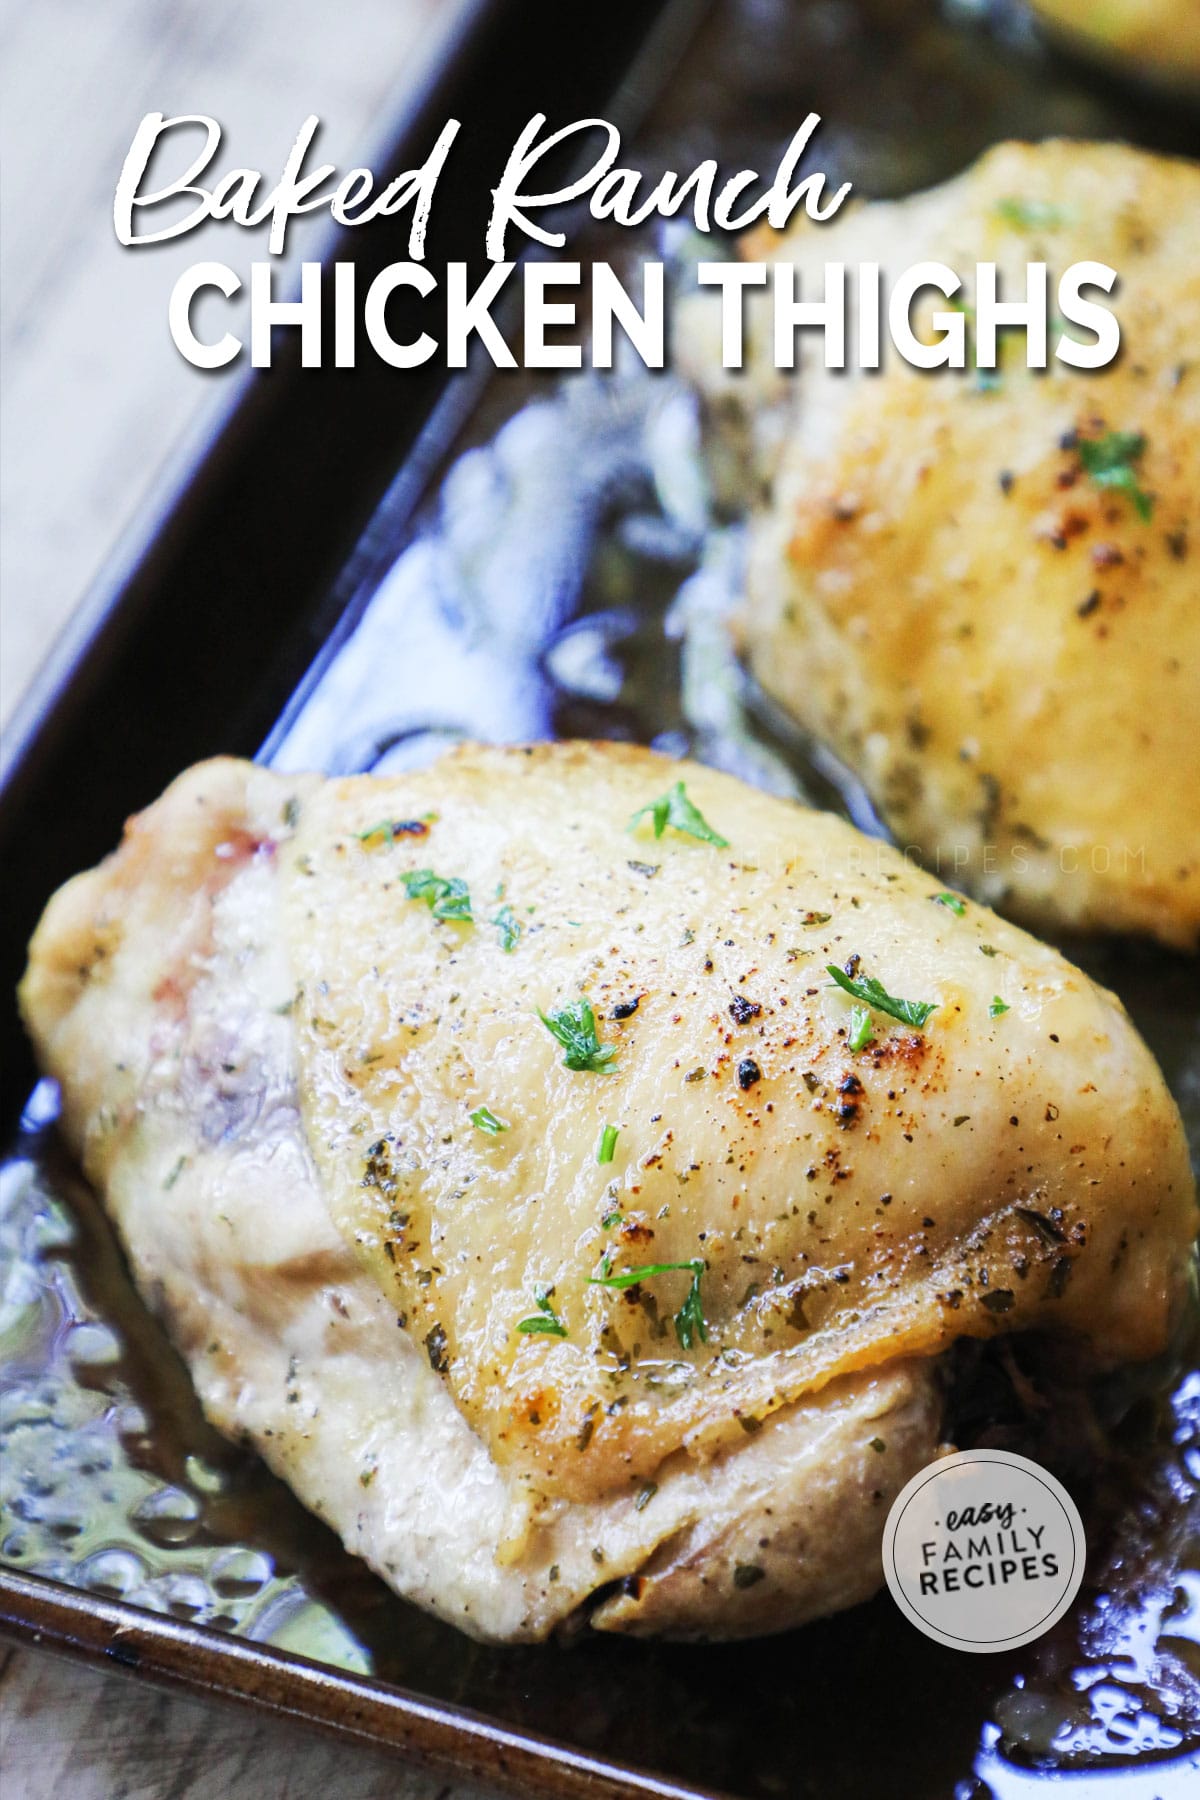 Roasted chicken thighs with hidden valley ranch mix